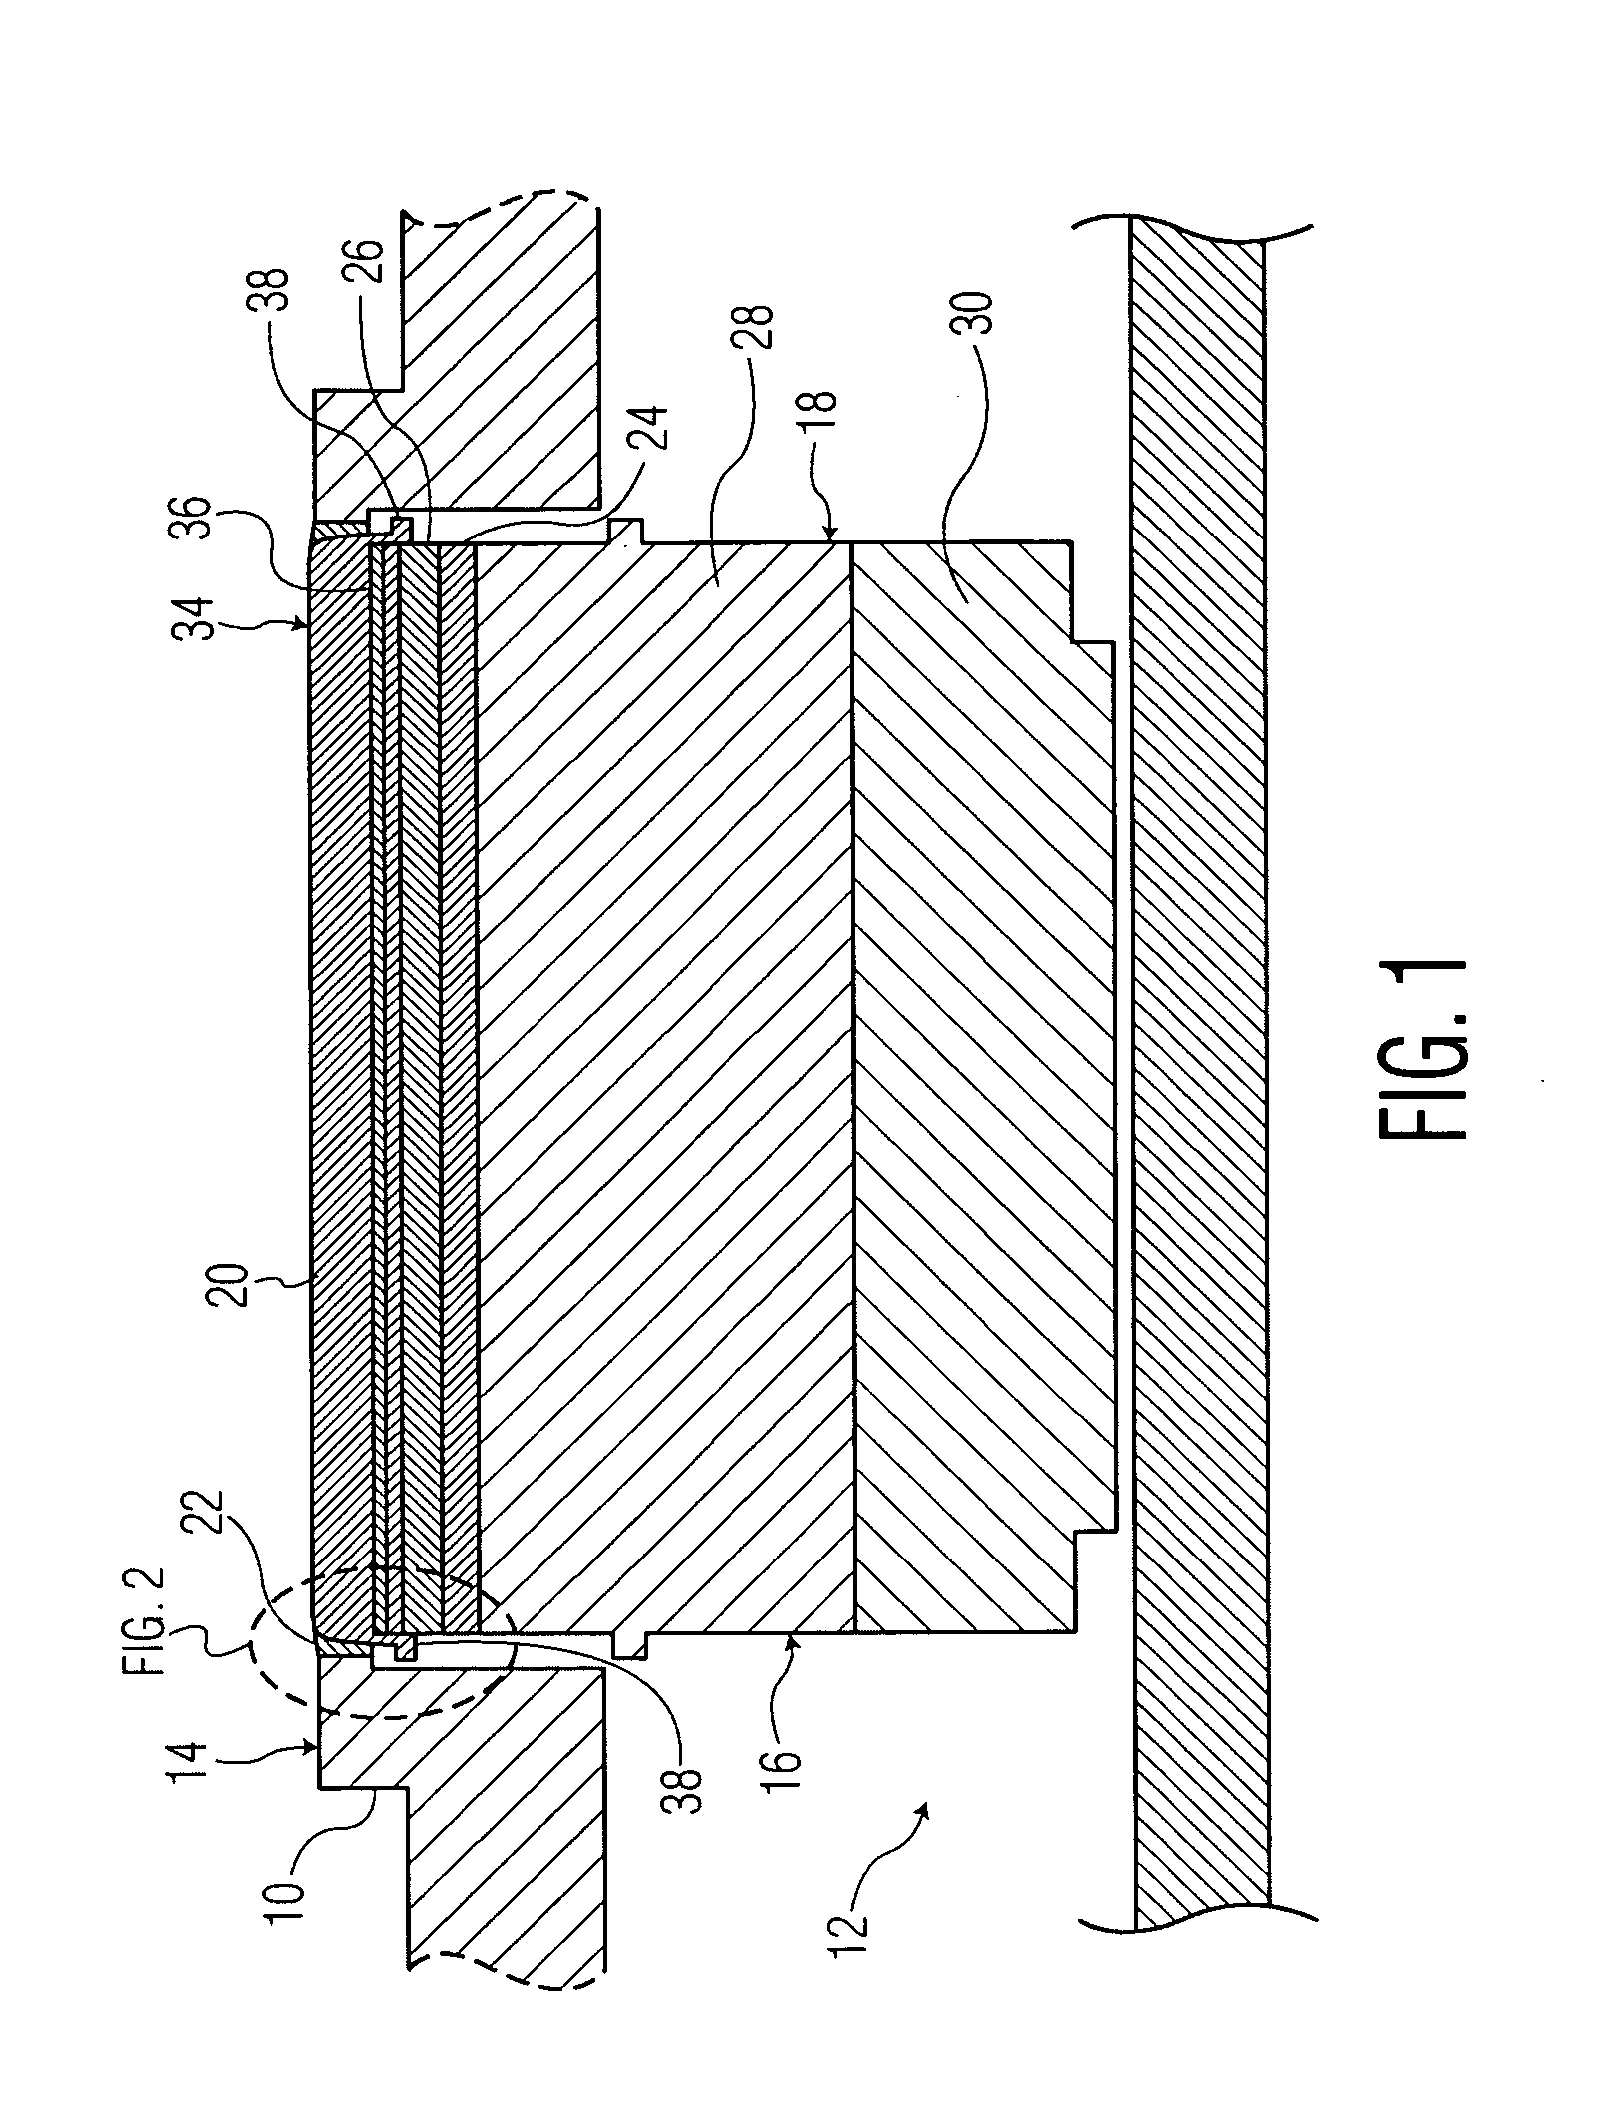 Transducer assembly for ultrasound probes